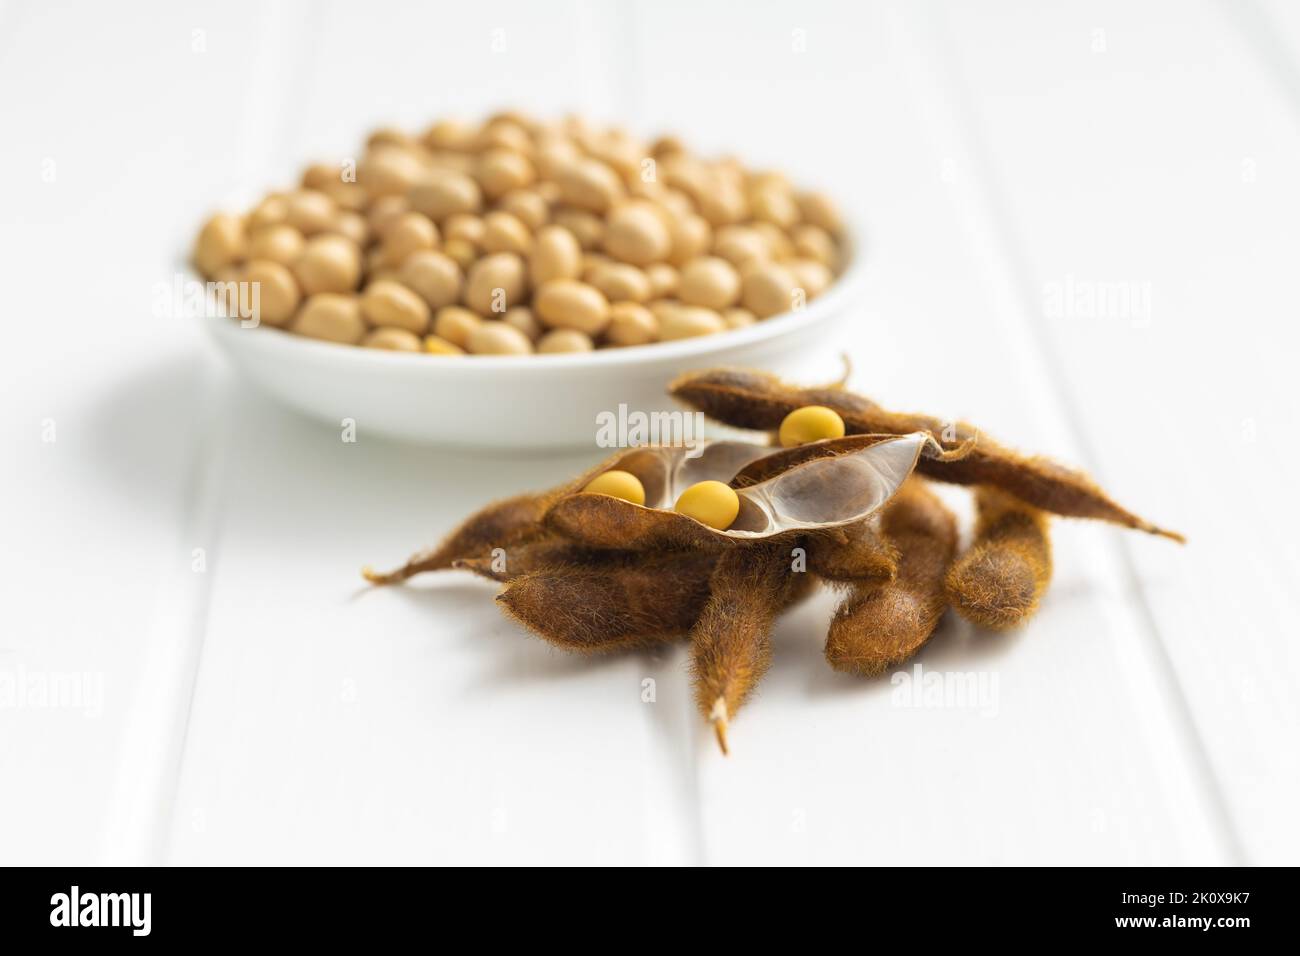 Soy beans. Dried soybean pod on the white table. Stock Photo